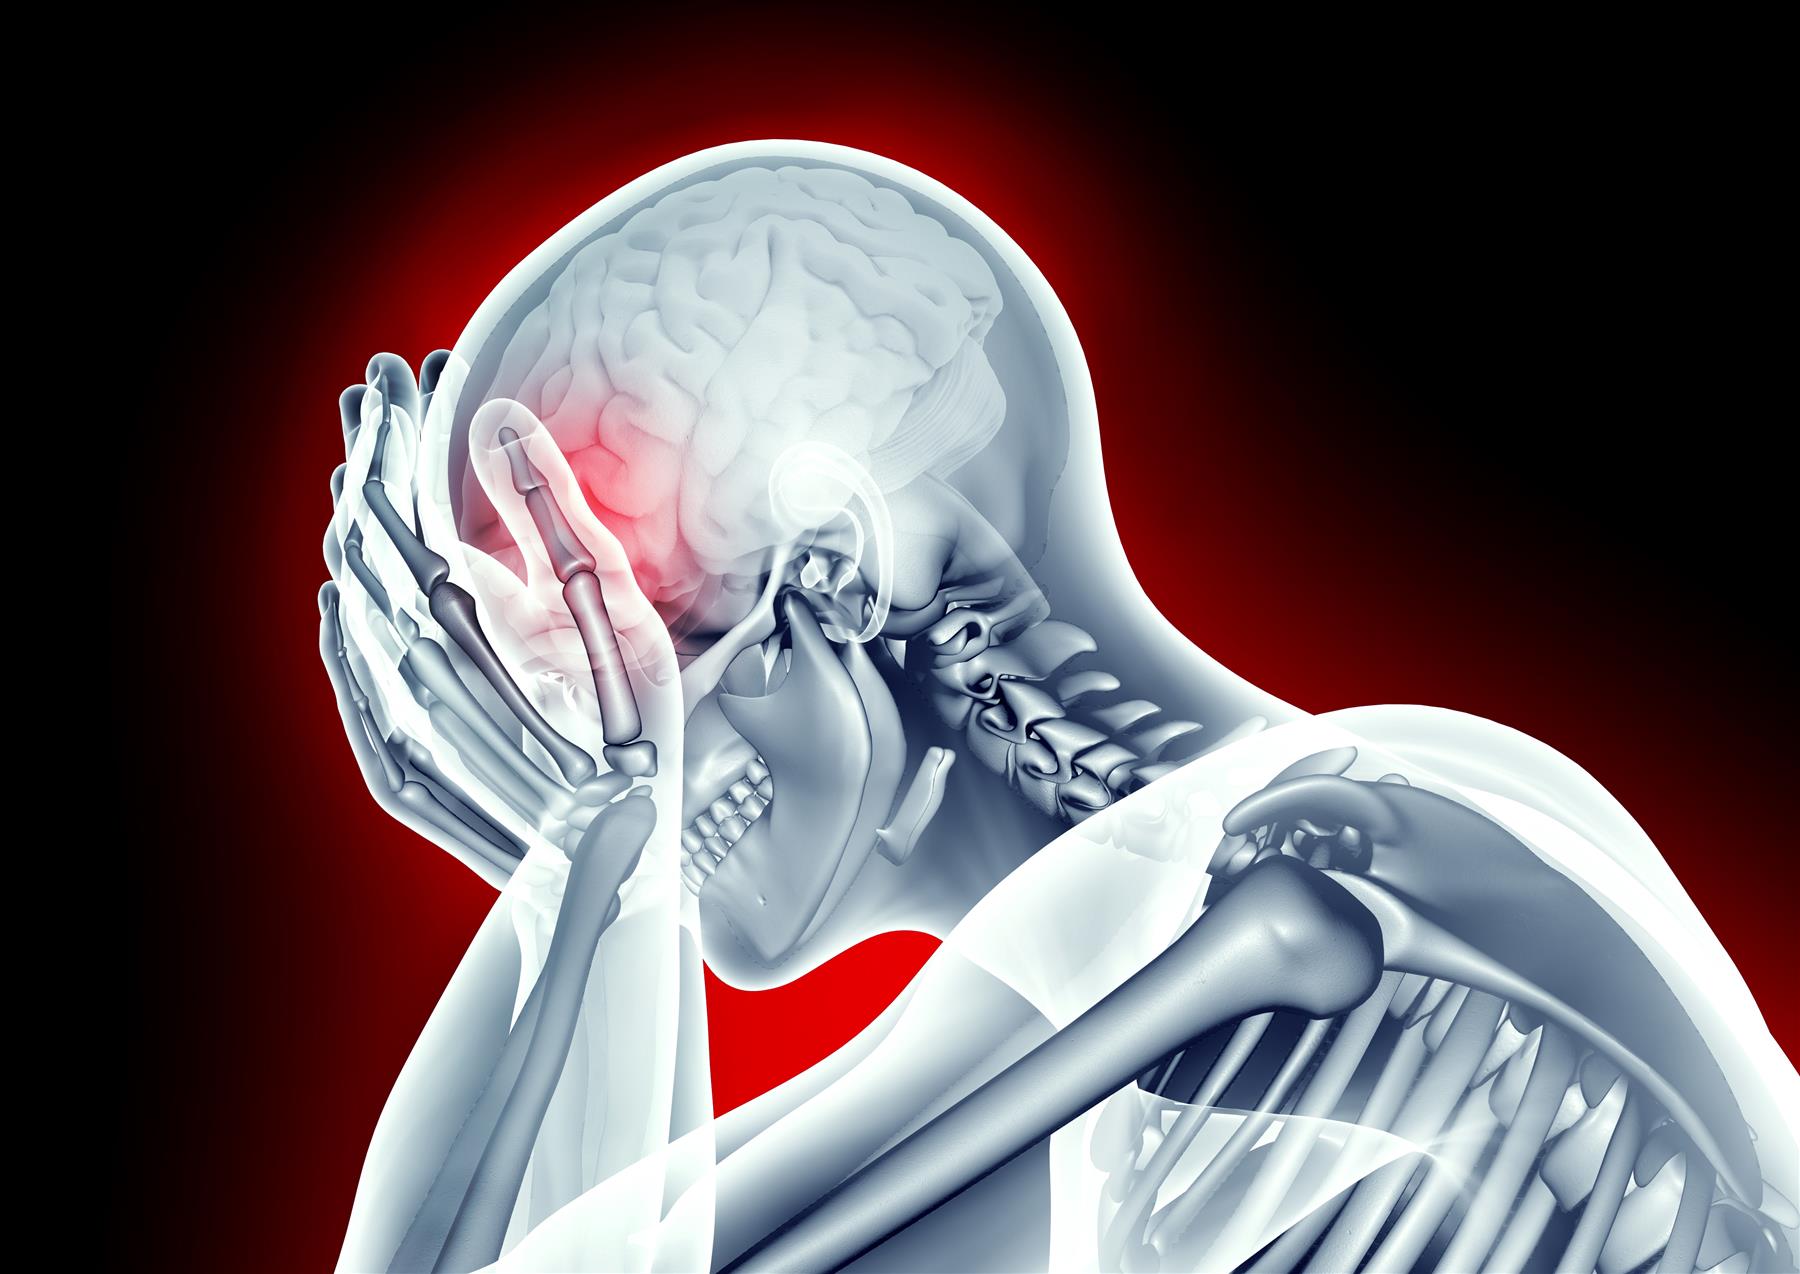 A Car Accident Brain Injury: Understanding the Signs